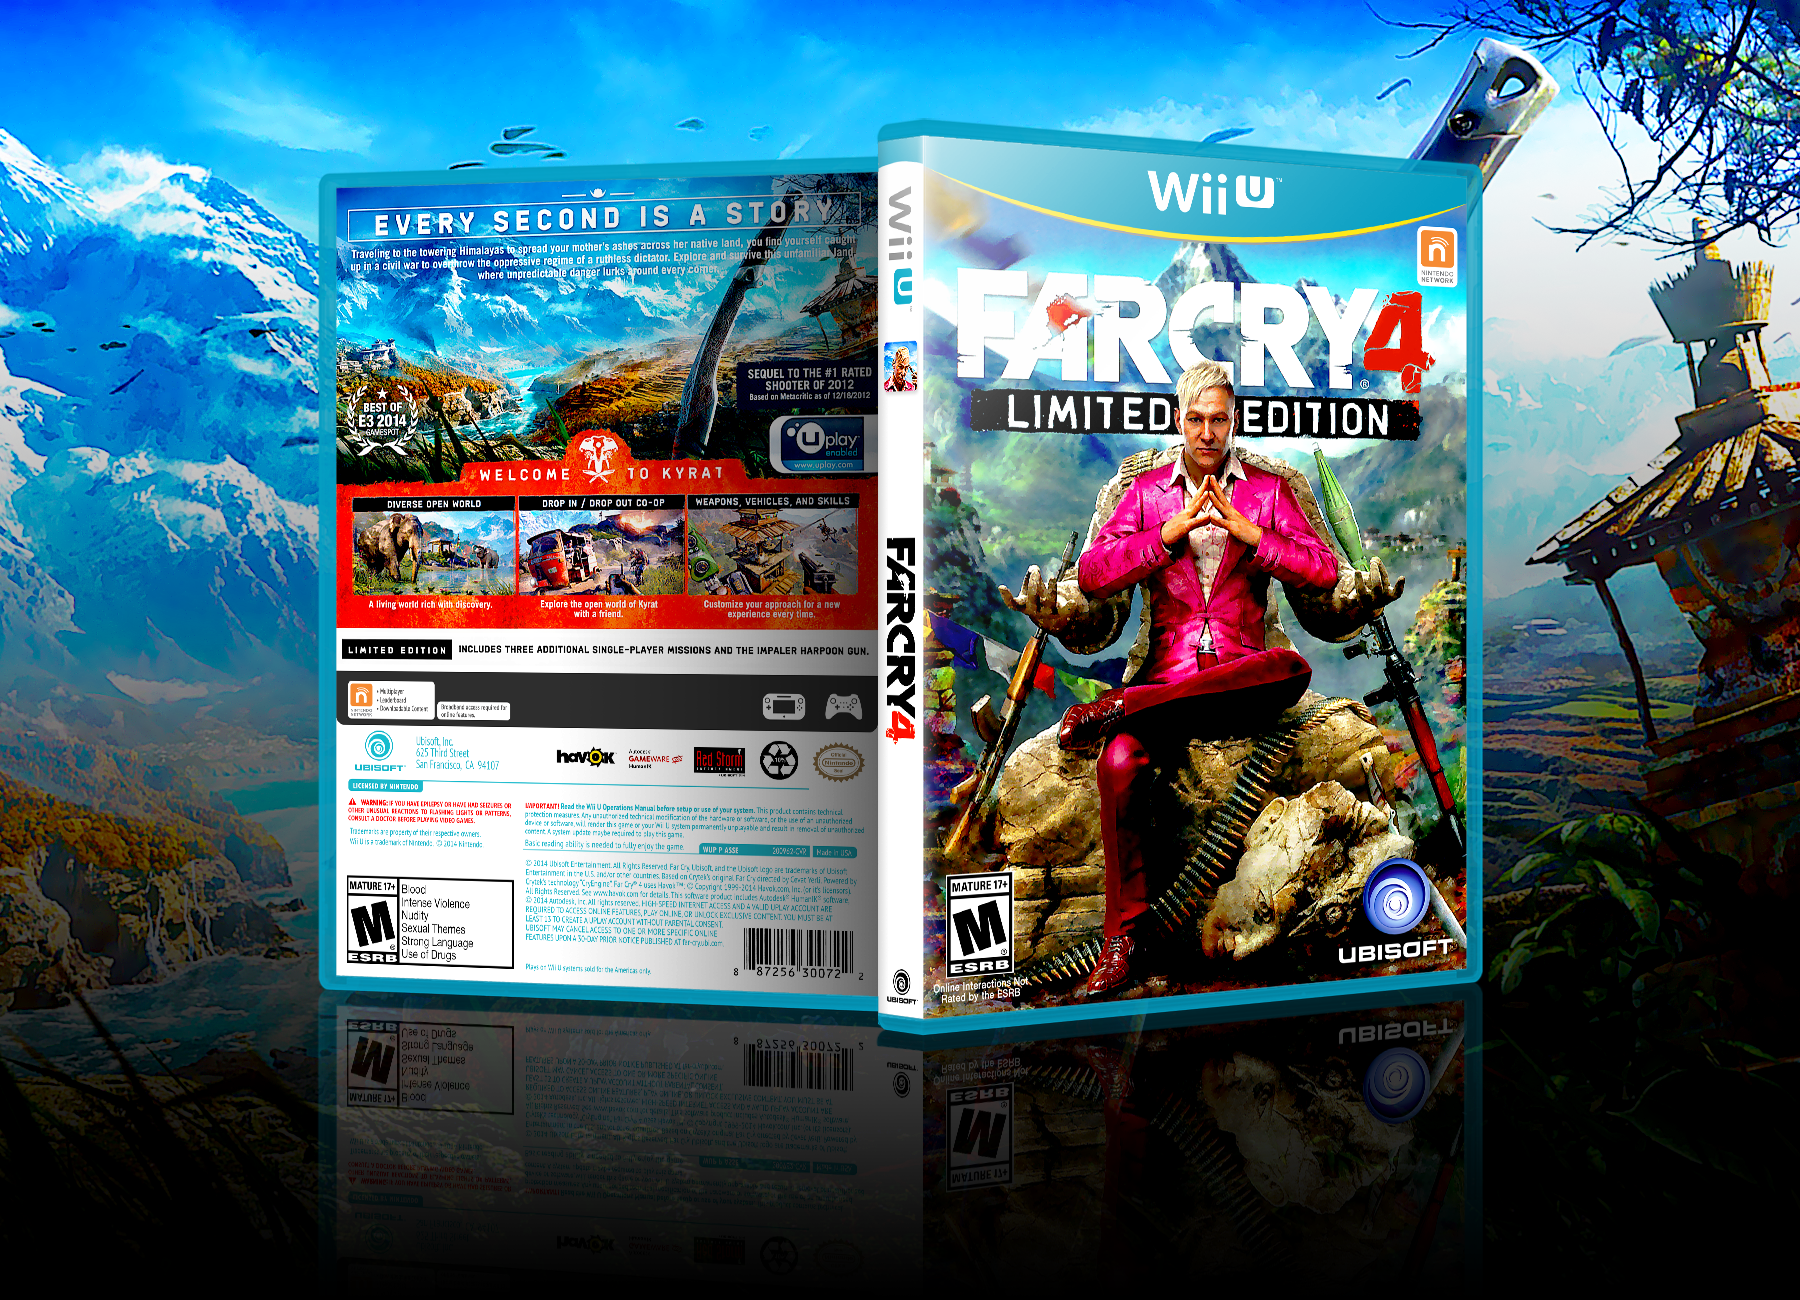 FarCry 4: Limited Edition box cover